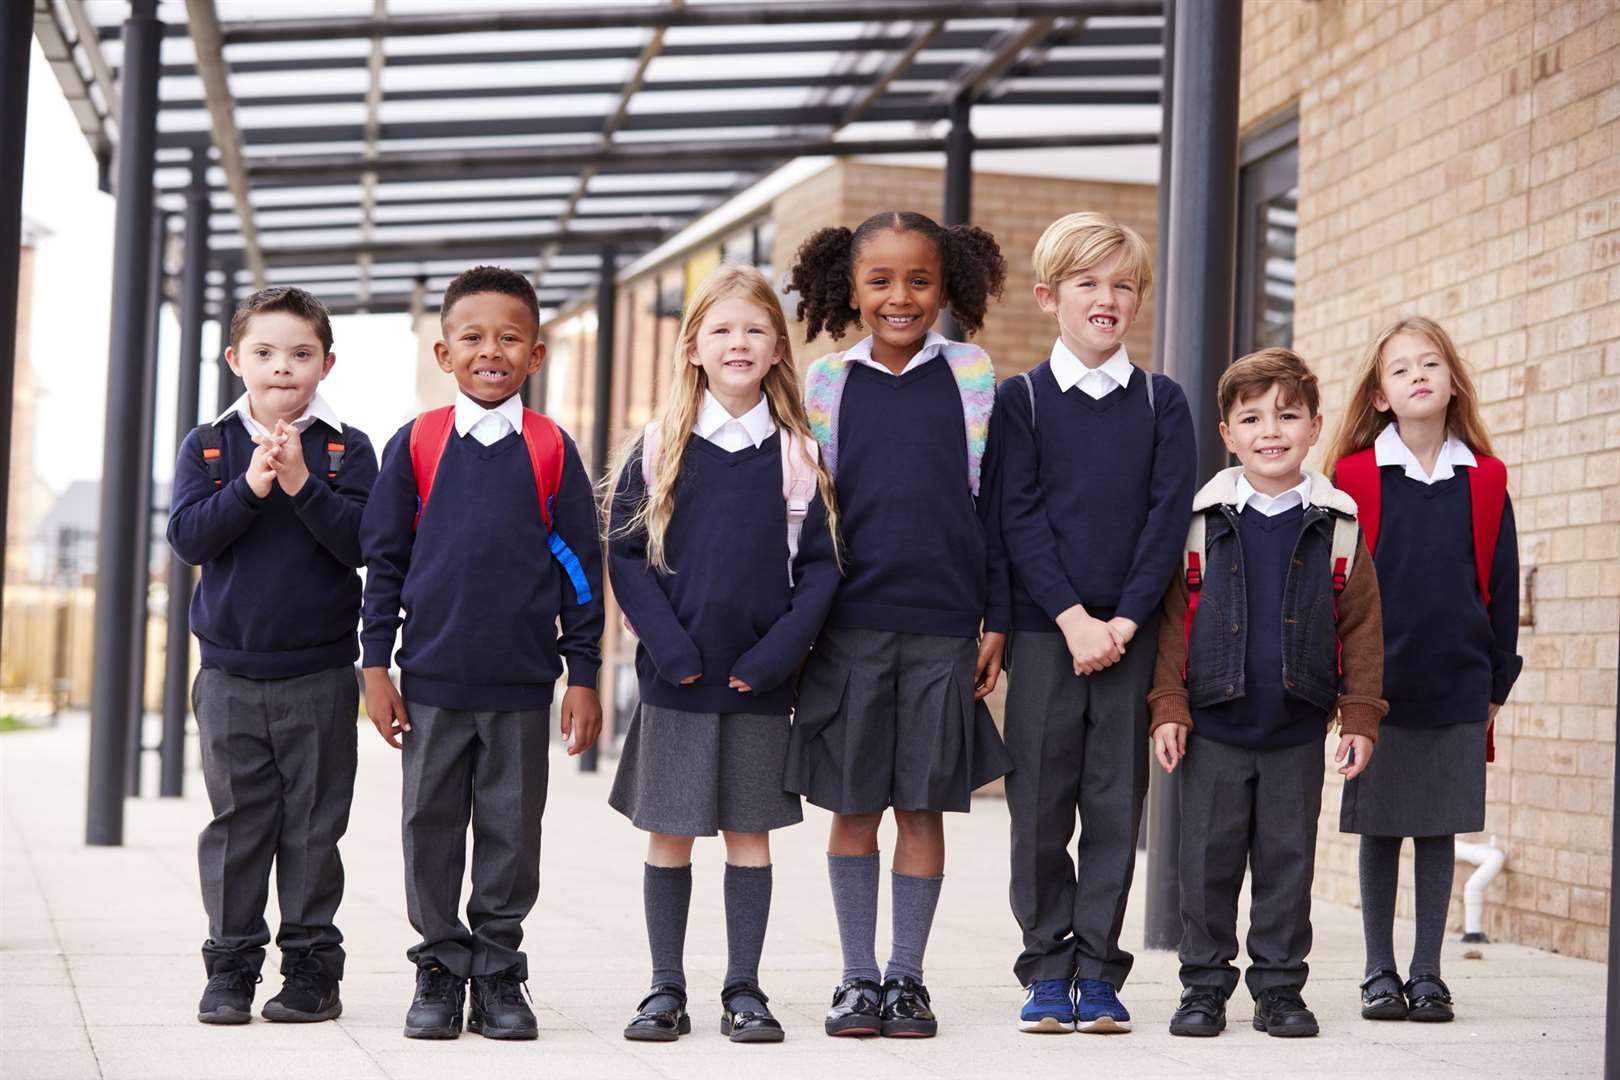 Kitting kids out for a new term can be costly – but there are ways to trim back